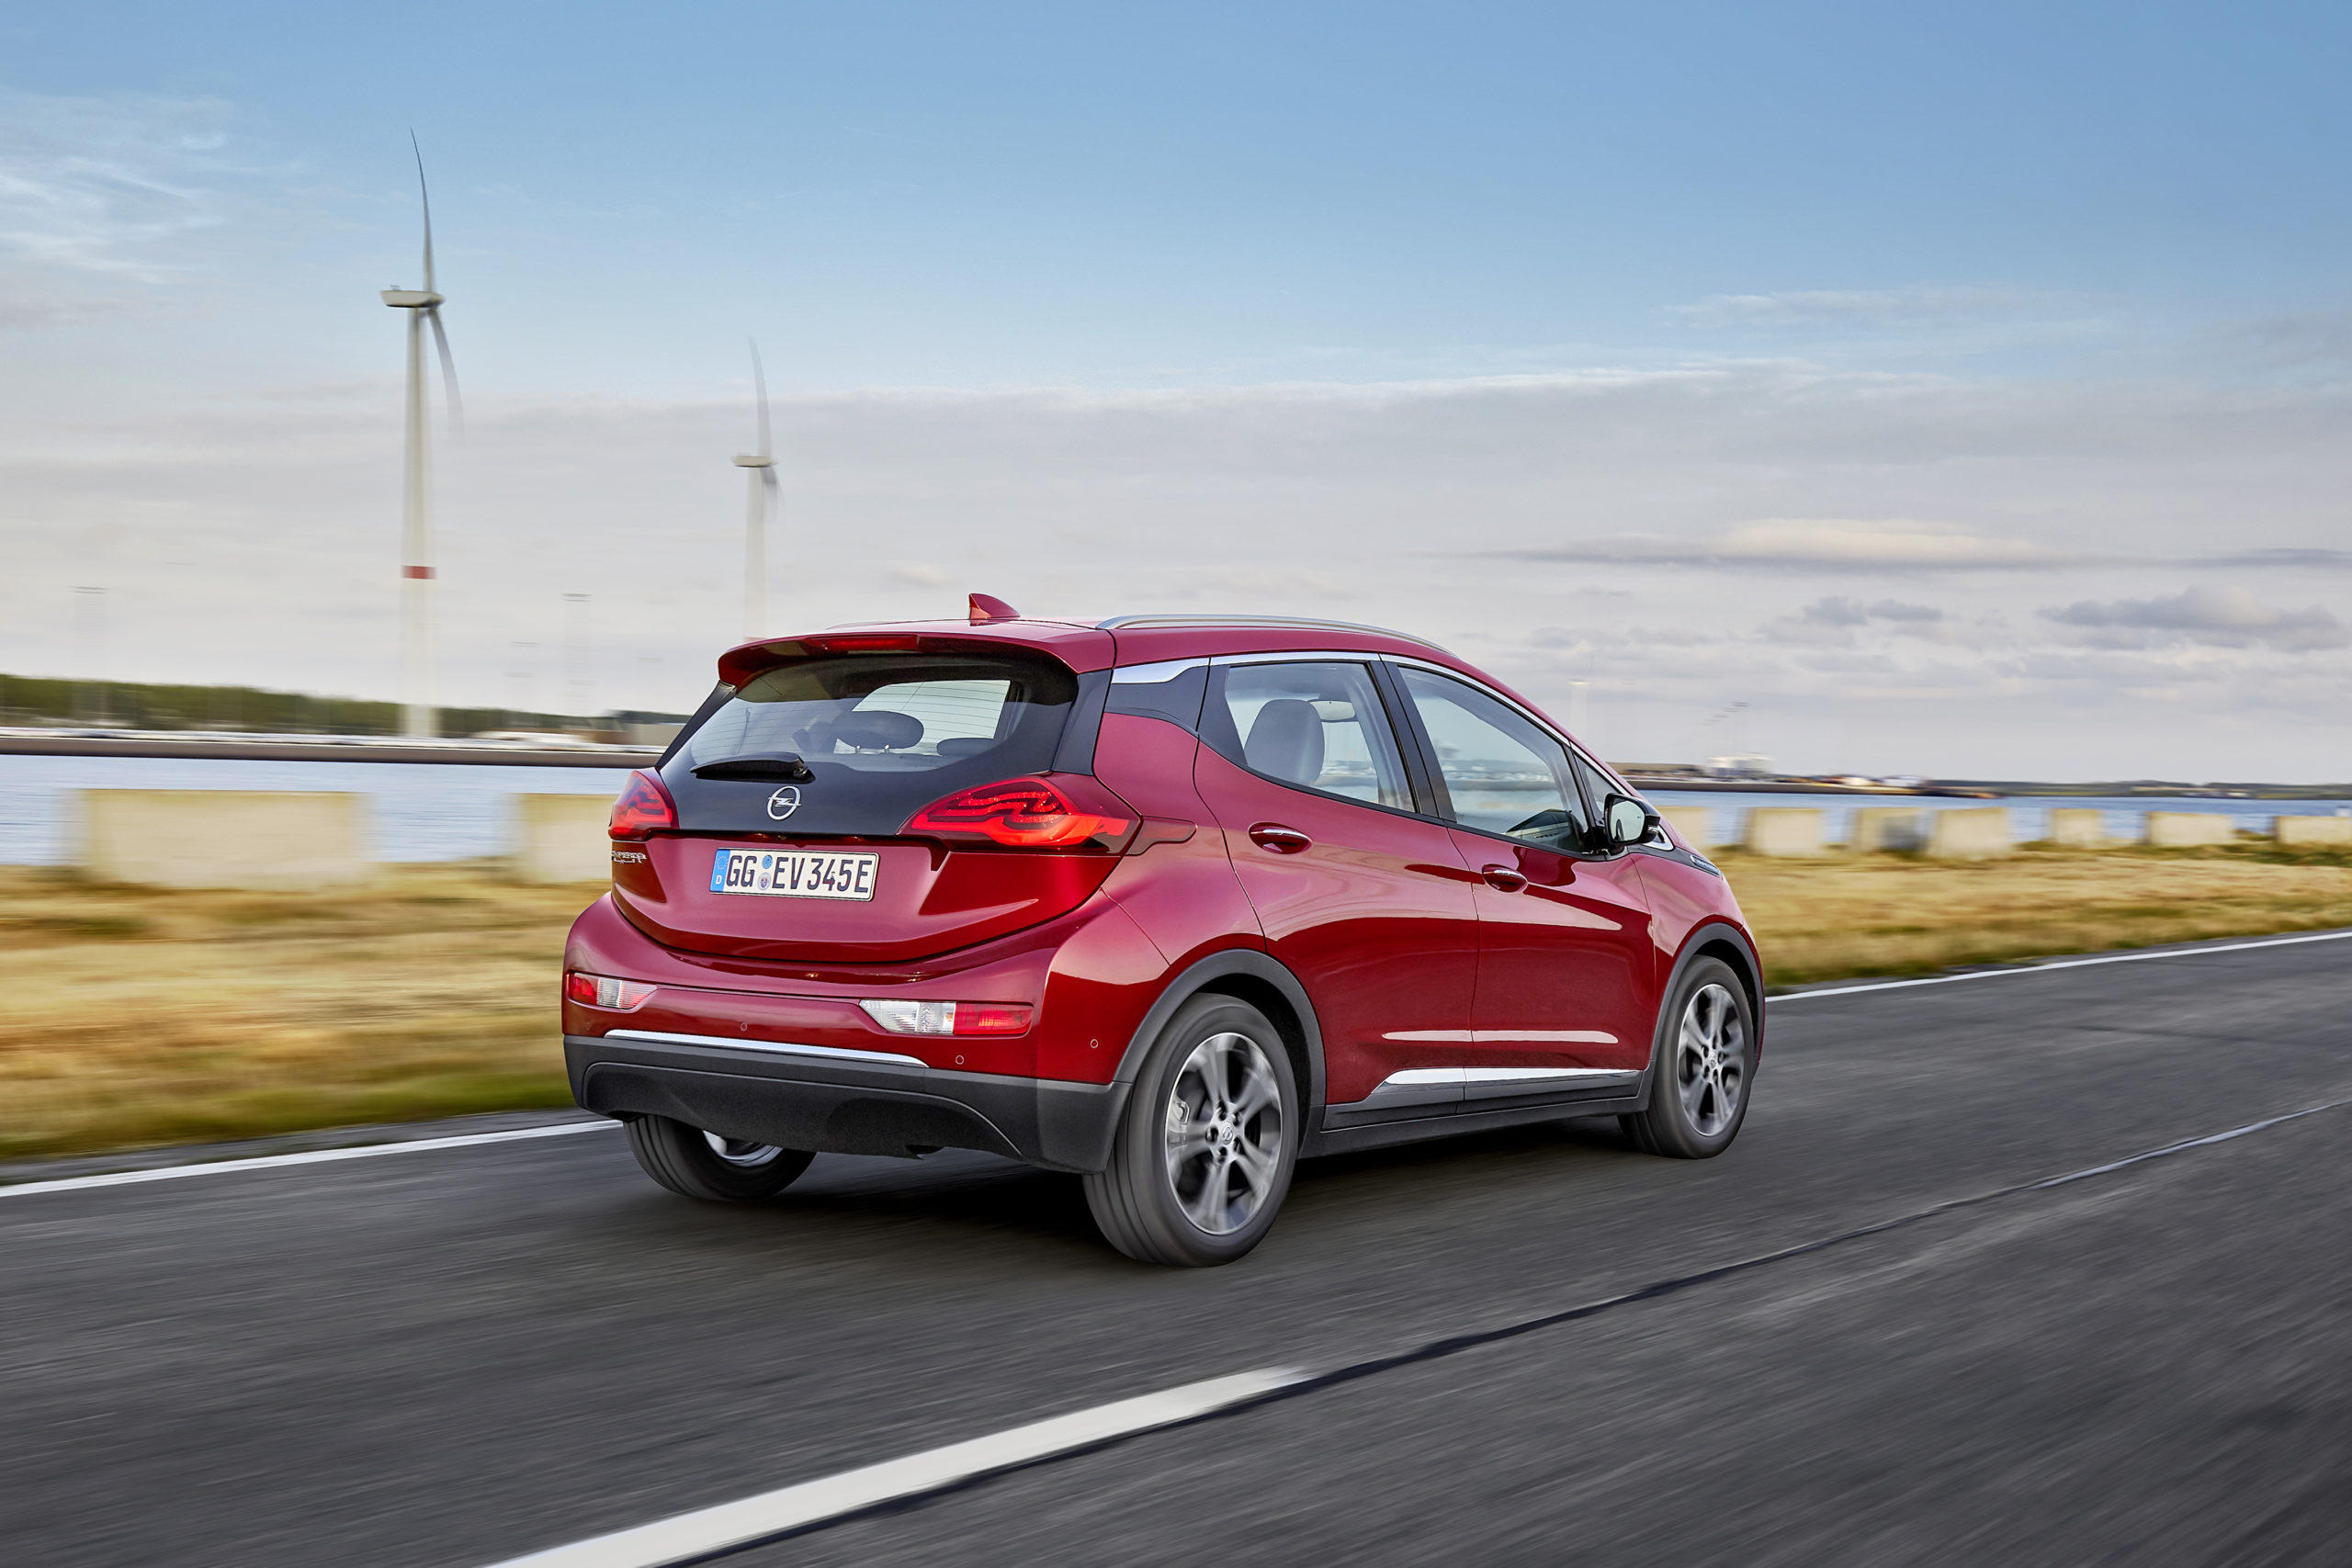 After Chevrolet Bolt, Opel Ampera-e also gets replacement battery (update)